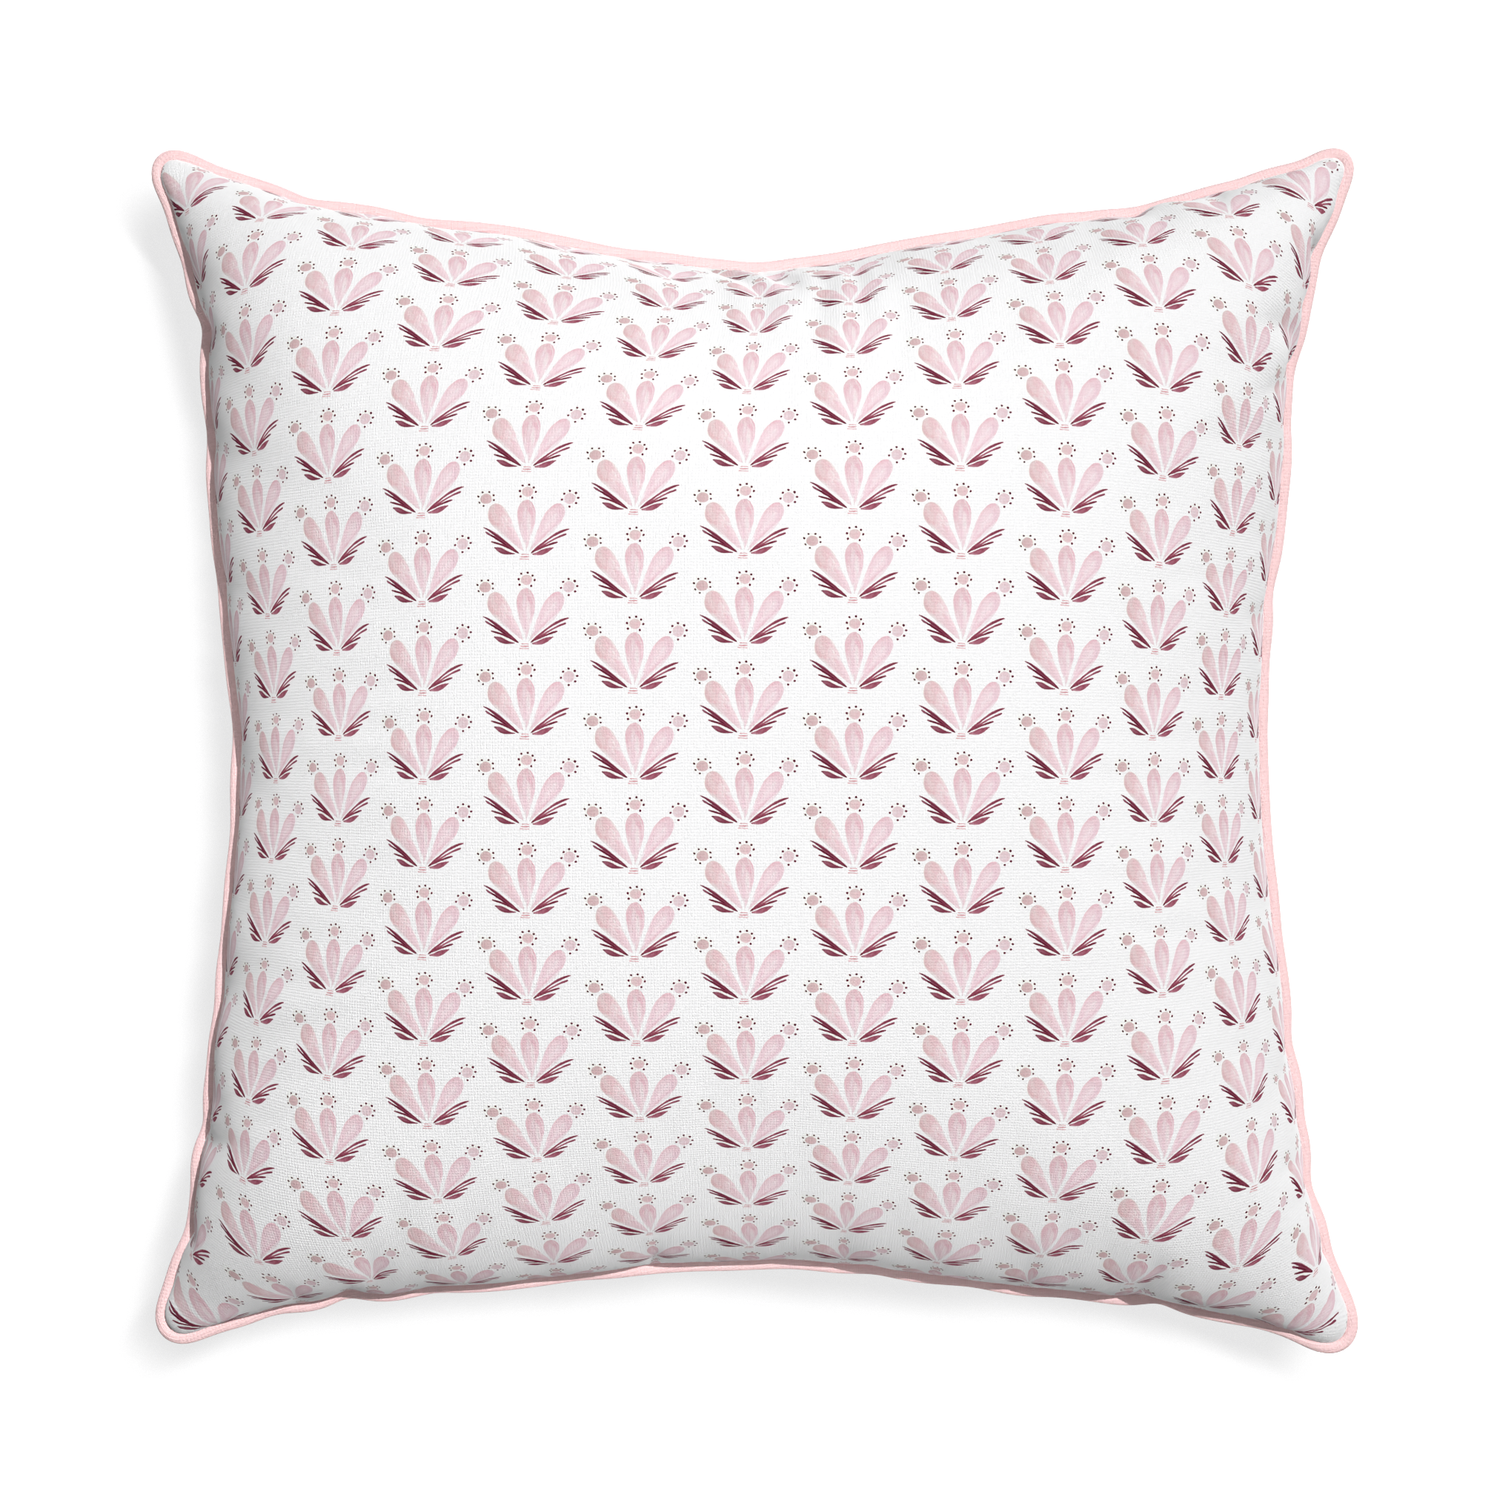 Euro-sham serena pink custom pink & burgundy drop repeat floralpillow with petal piping on white background